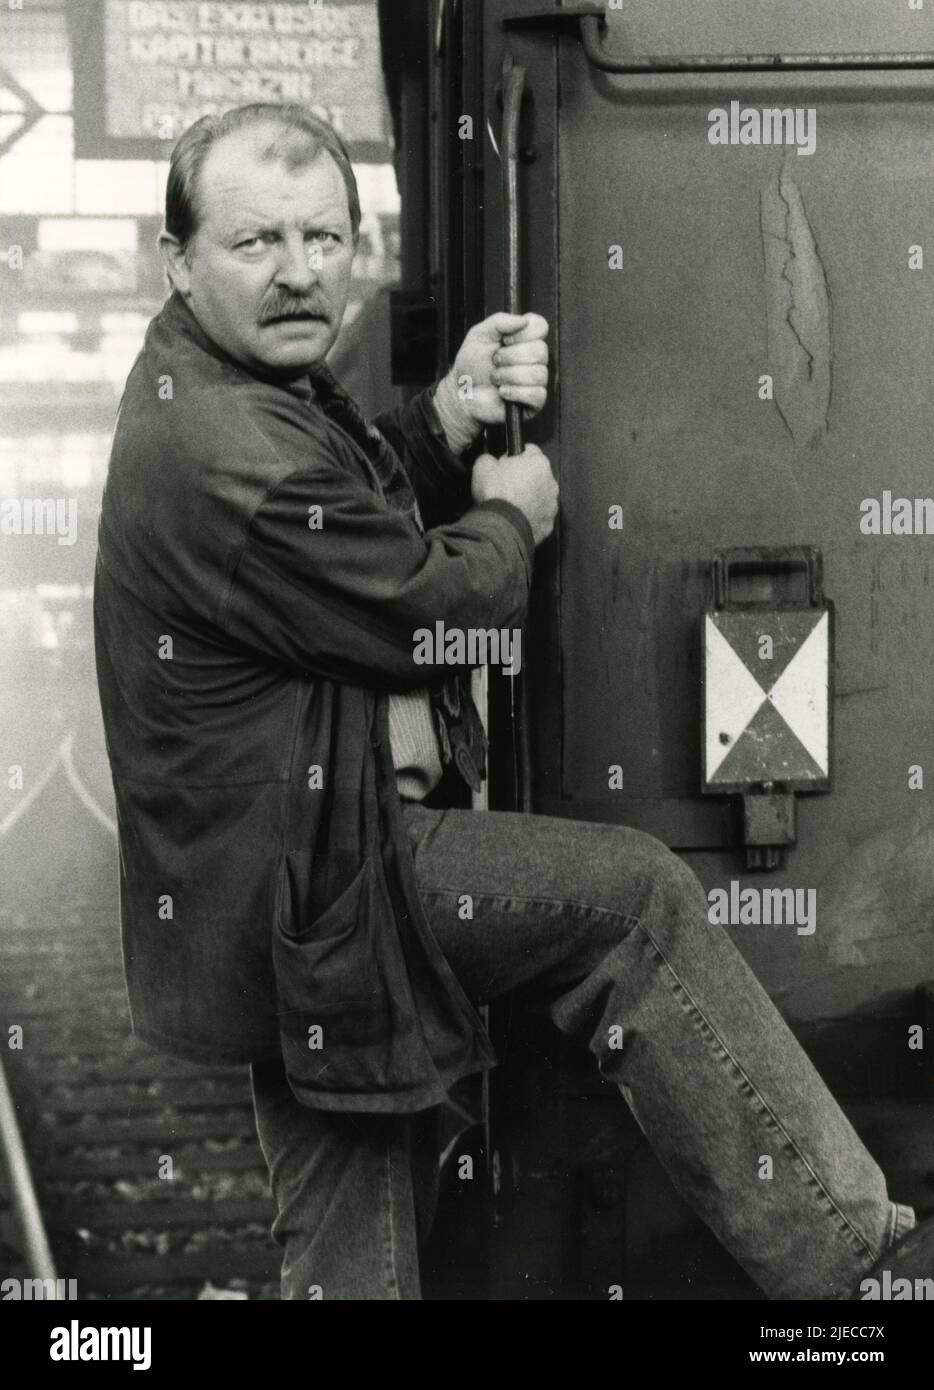 German actor Eberhard Feik in the TV Series A Man on the Train (Ein Mann am Zug), Germany 1993 Stock Photo